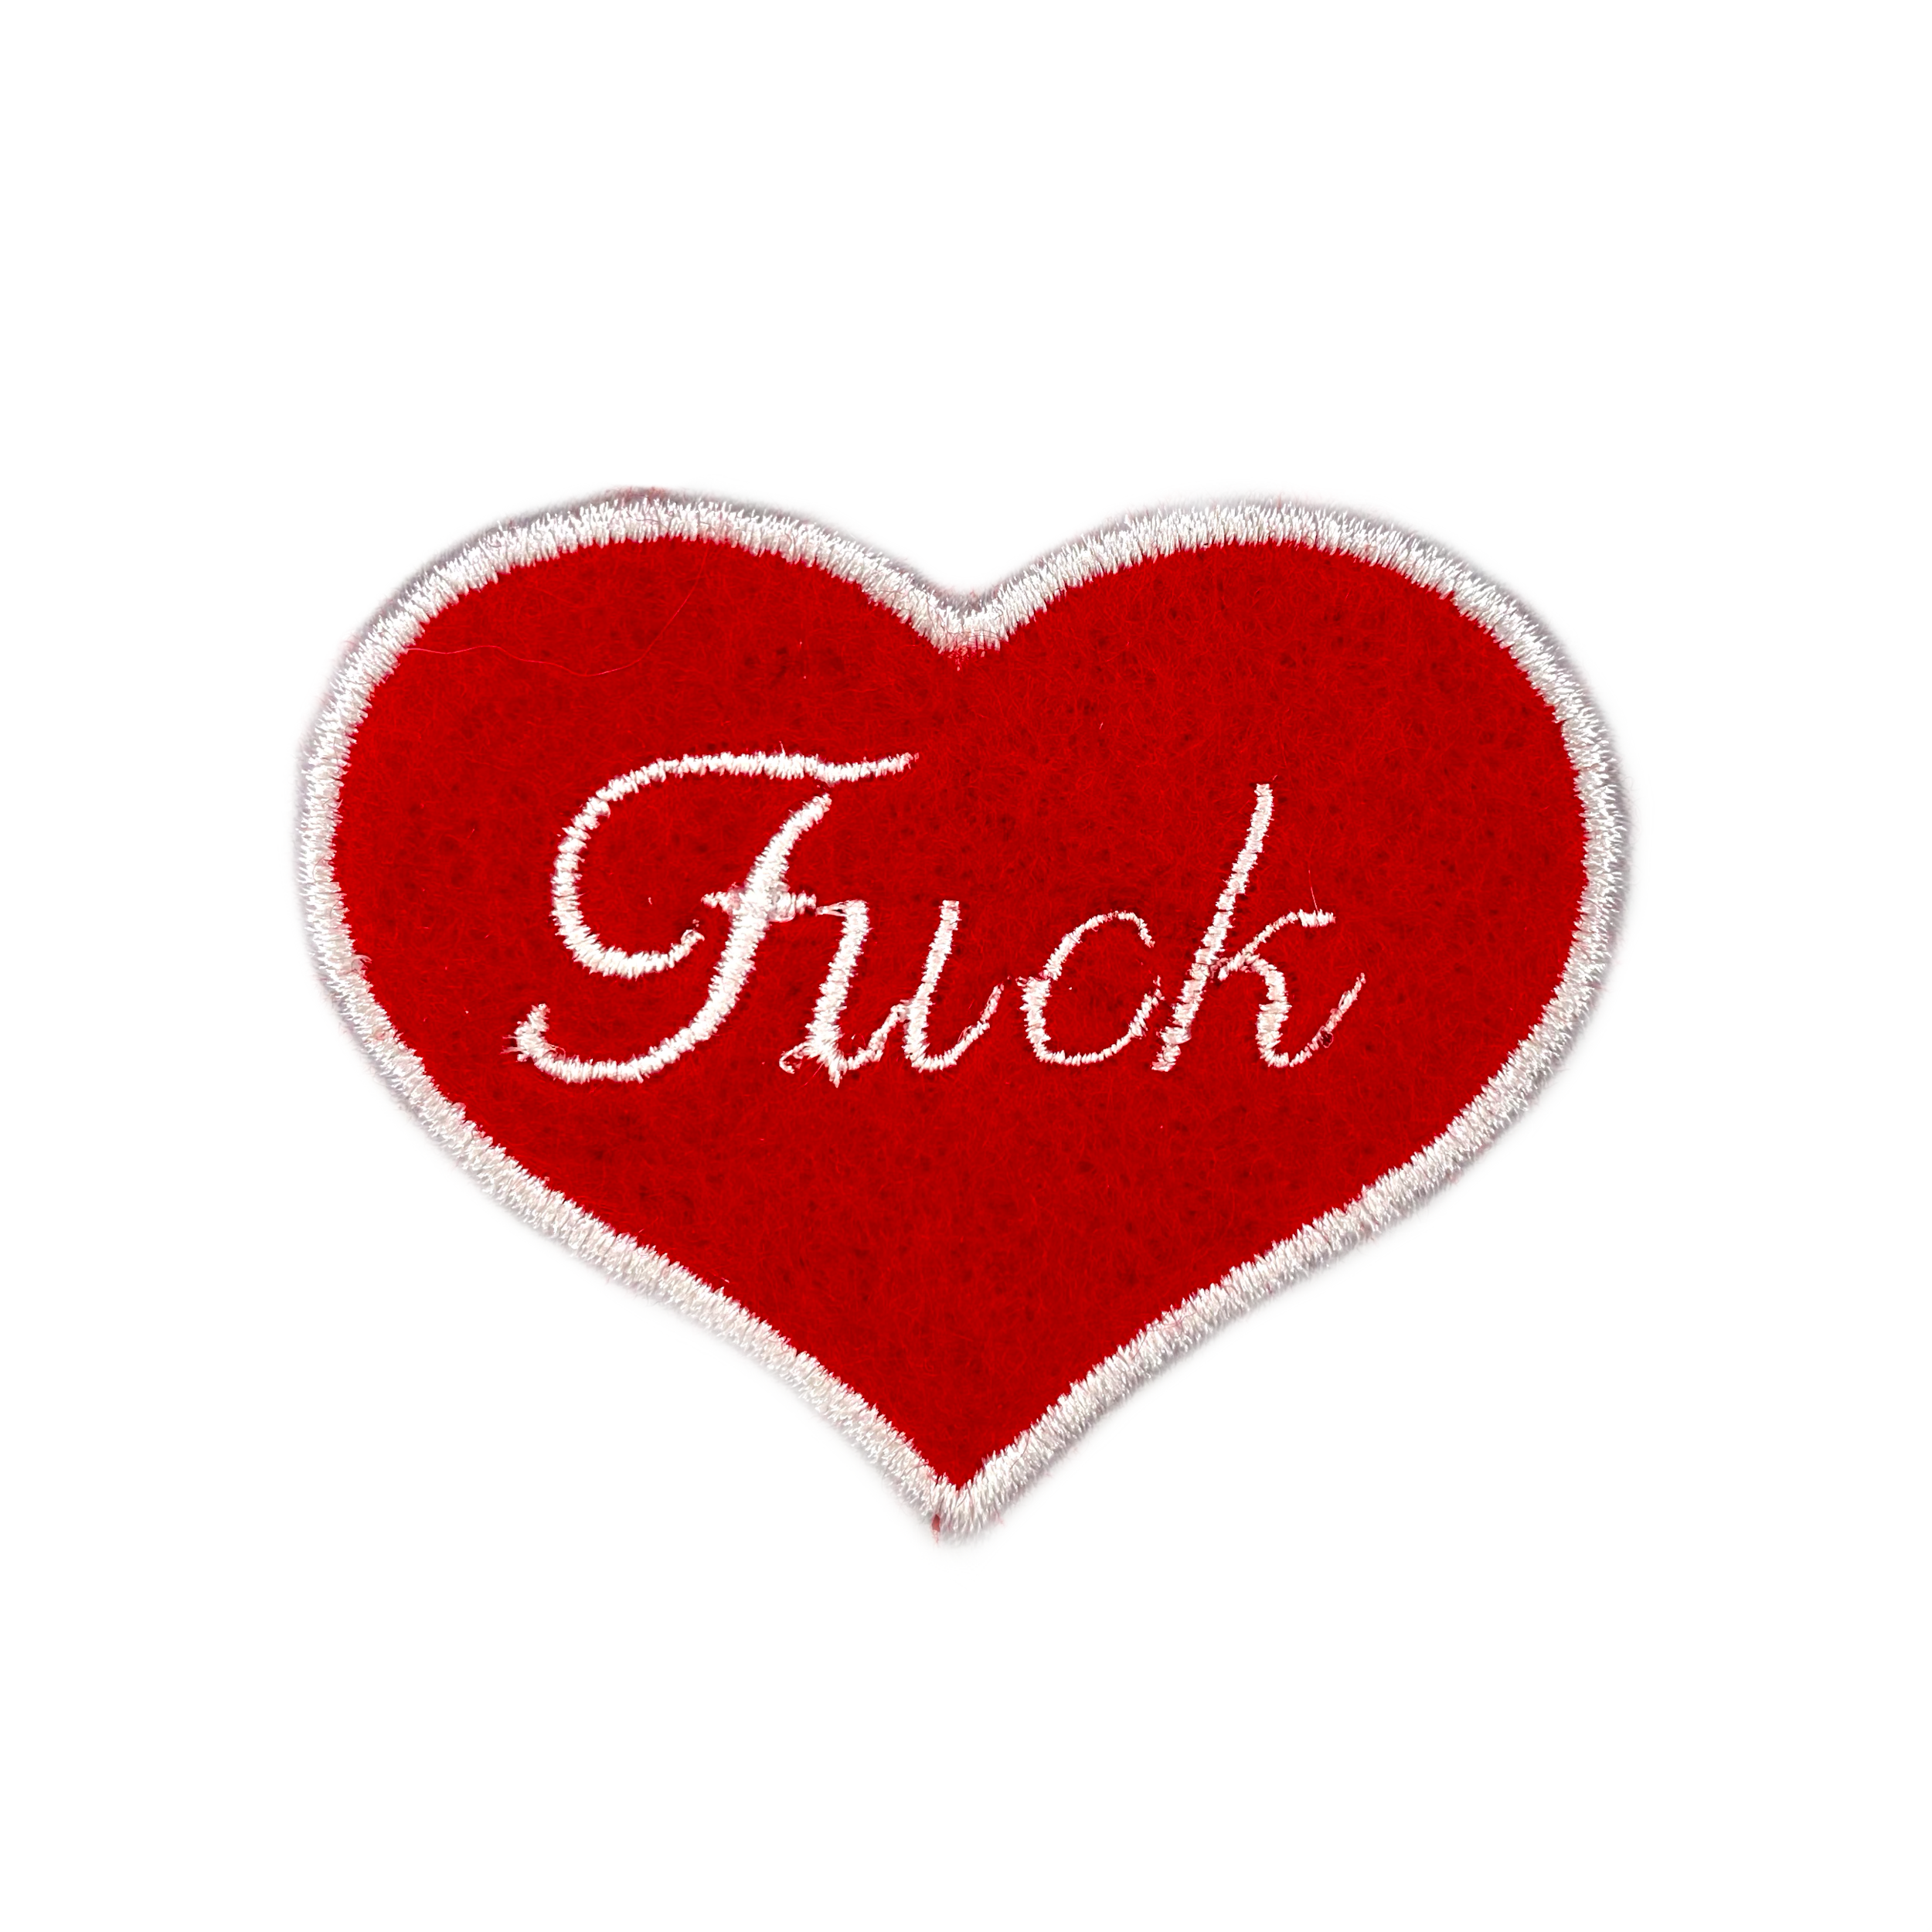 Fuck Heart Embroidered Iron-on Patch - IncredibleGood Inc